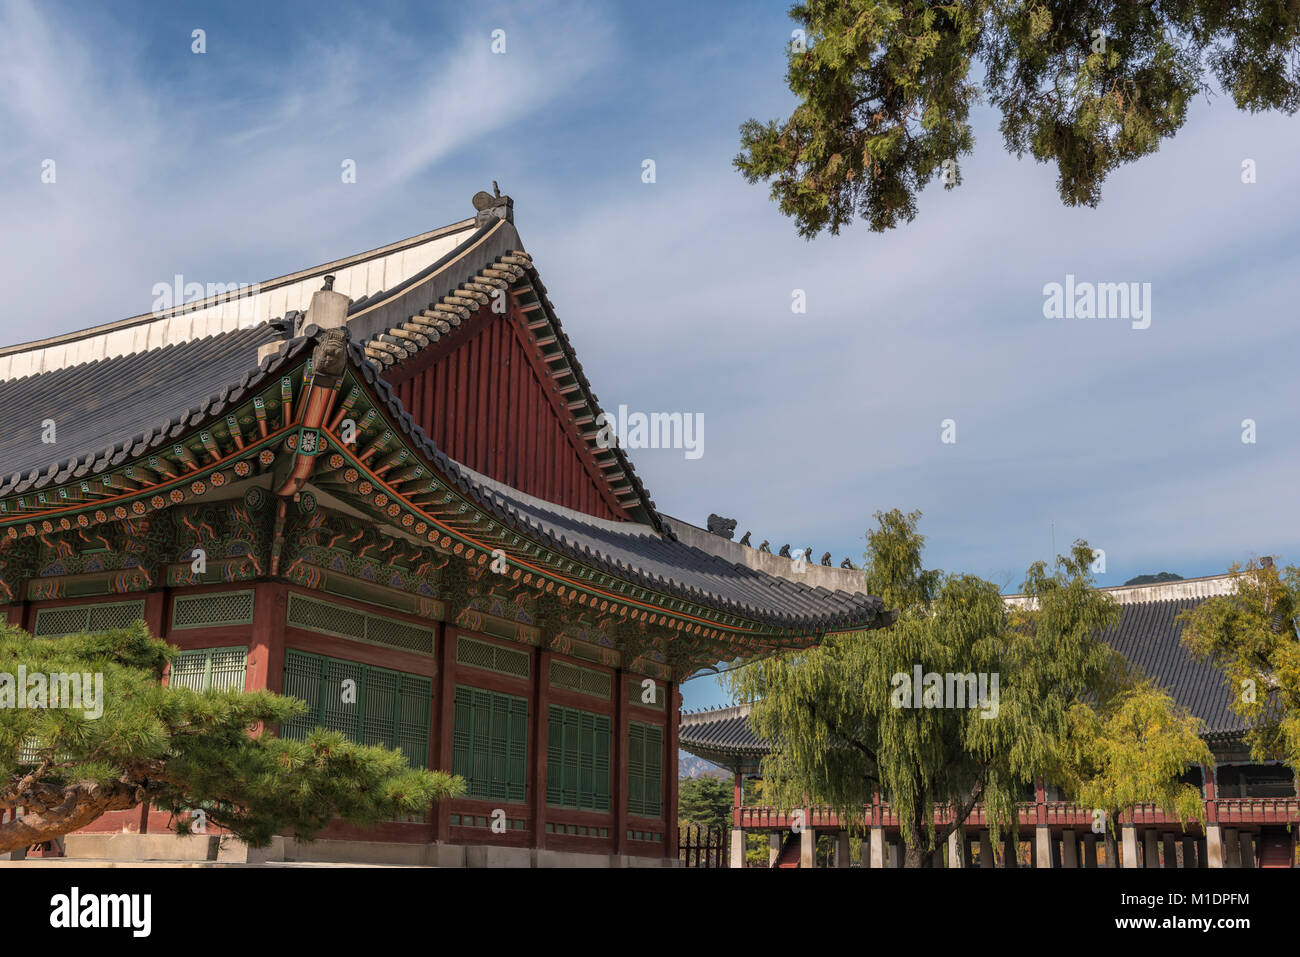 Gyeongbokgung royal palace, Seoul, South Korea - former residence of the Korean Emperor in the heart of the capital city Stock Photo